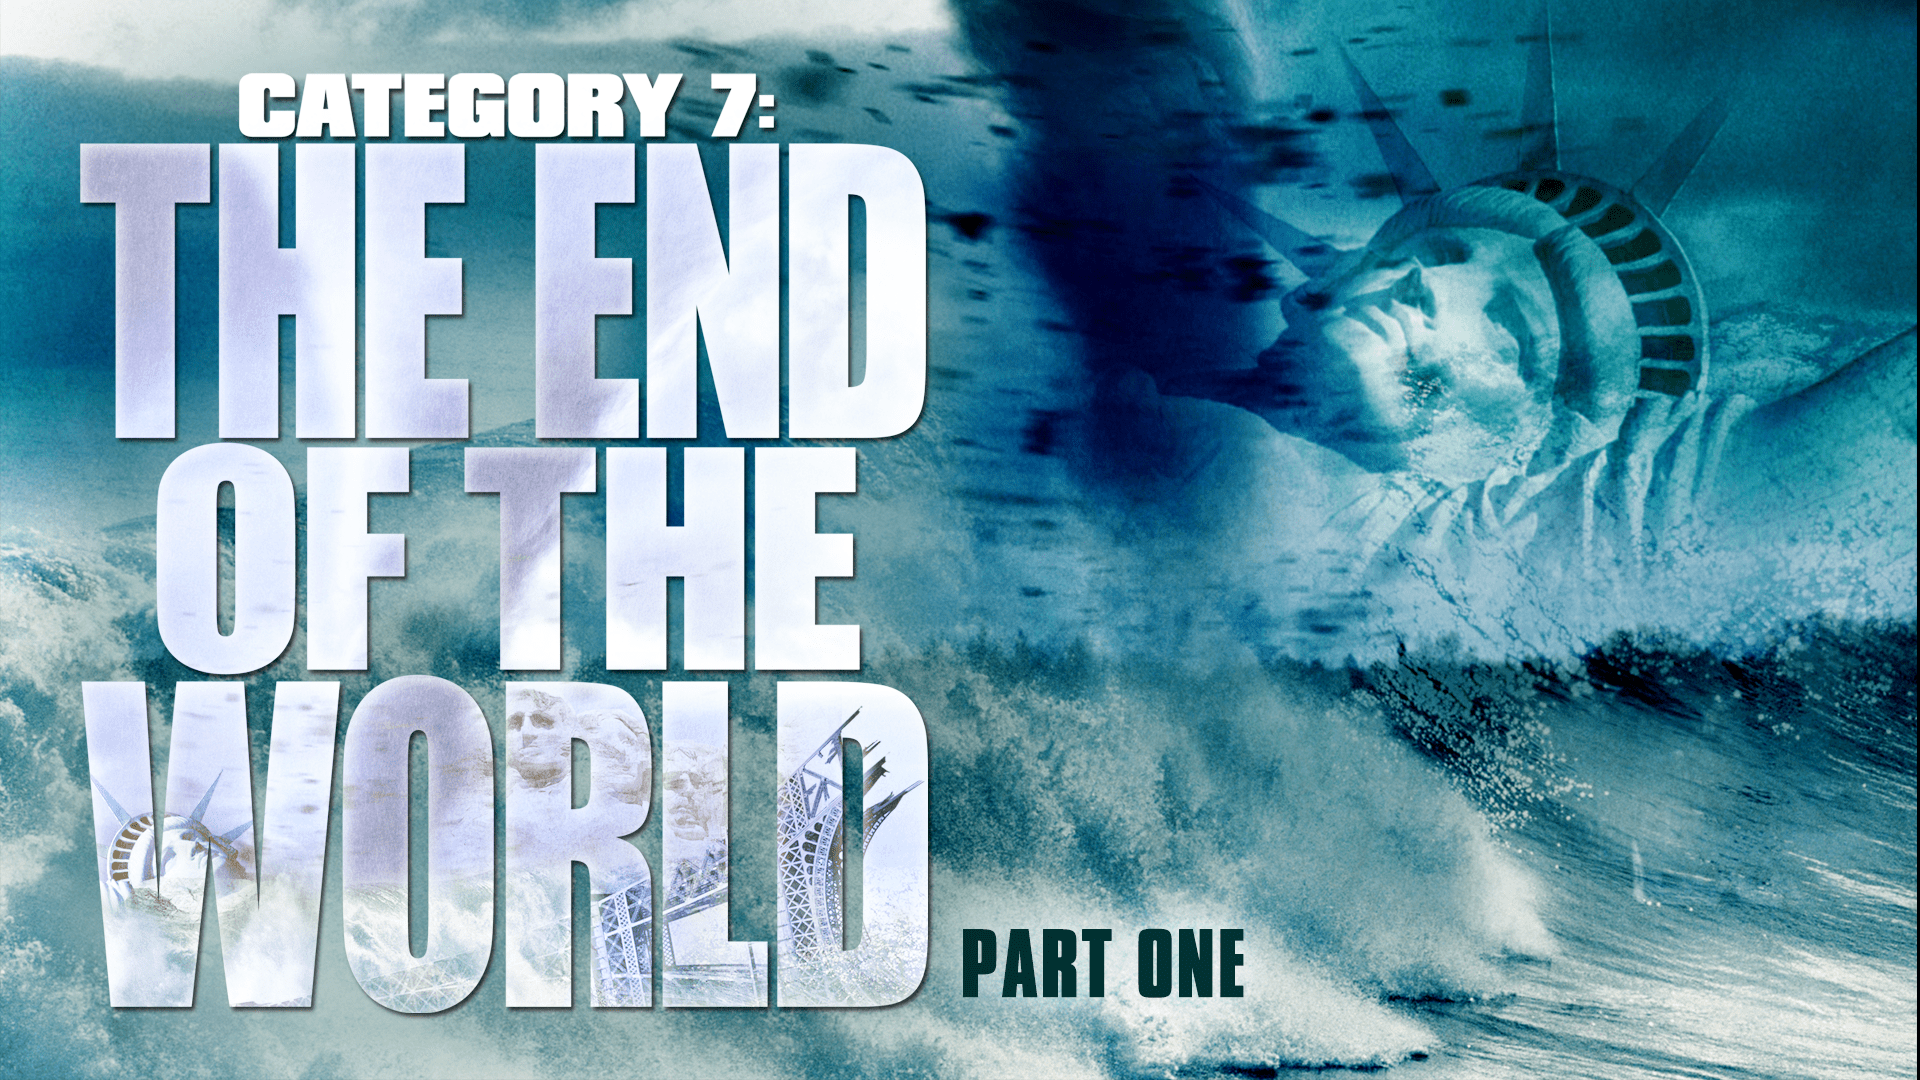 Show Category 7: The End of the World